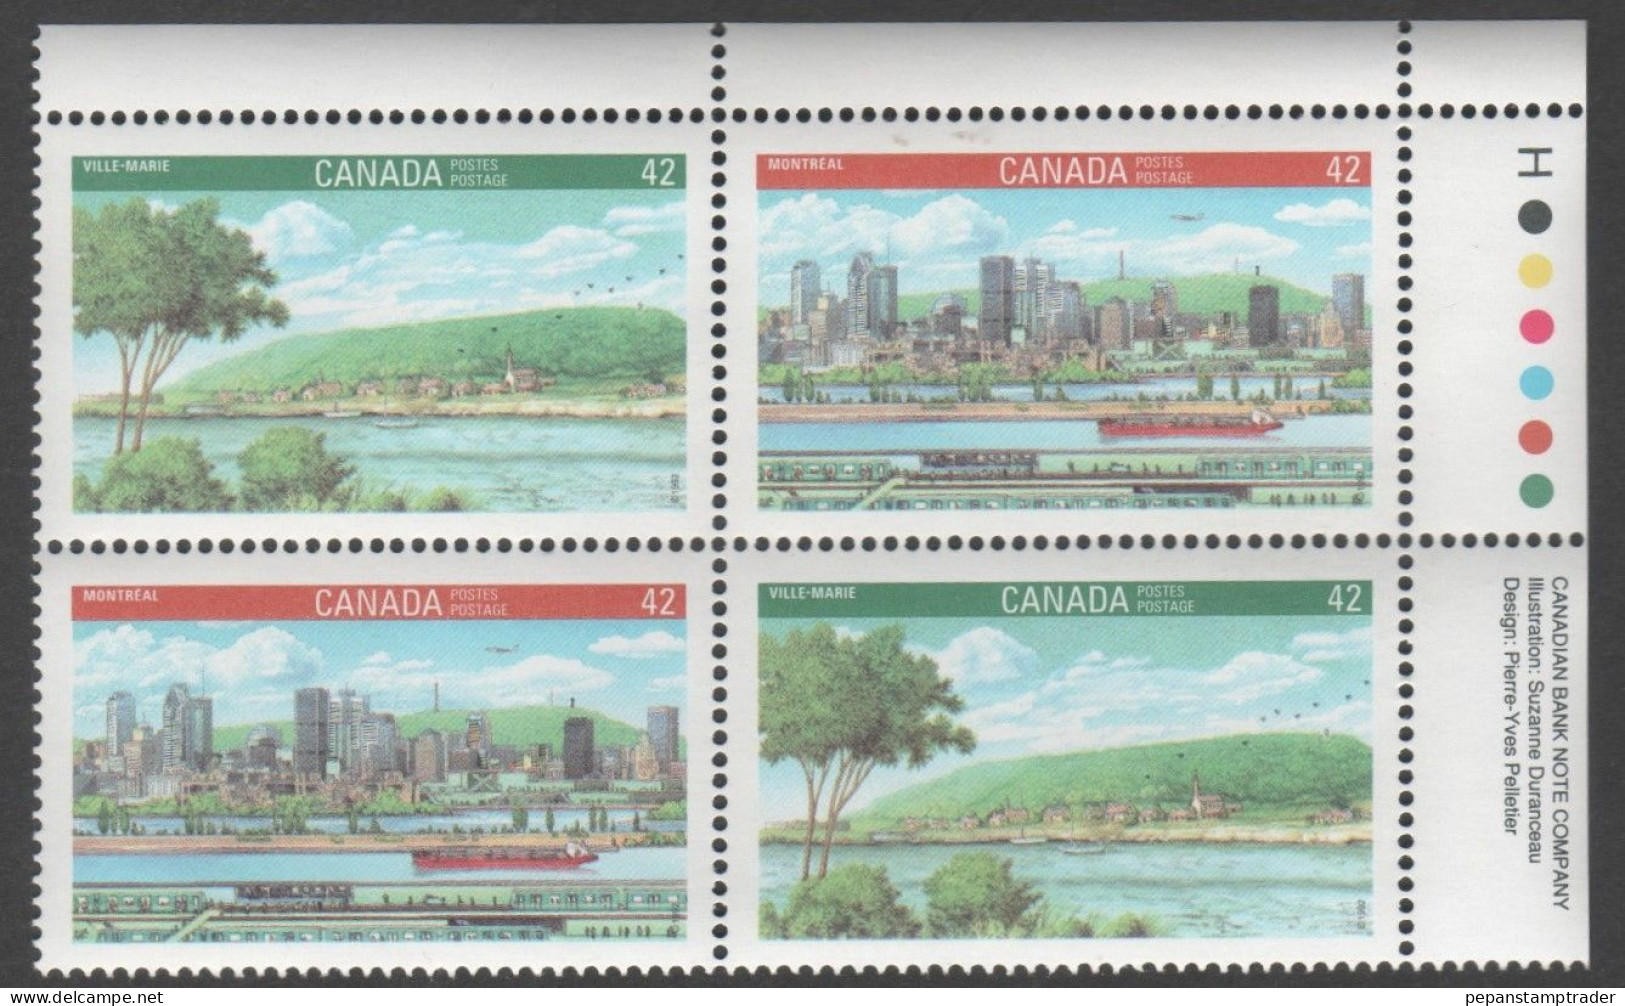 Canada - #1405a - MNH PB - Num. Planches & Inscriptions Marge